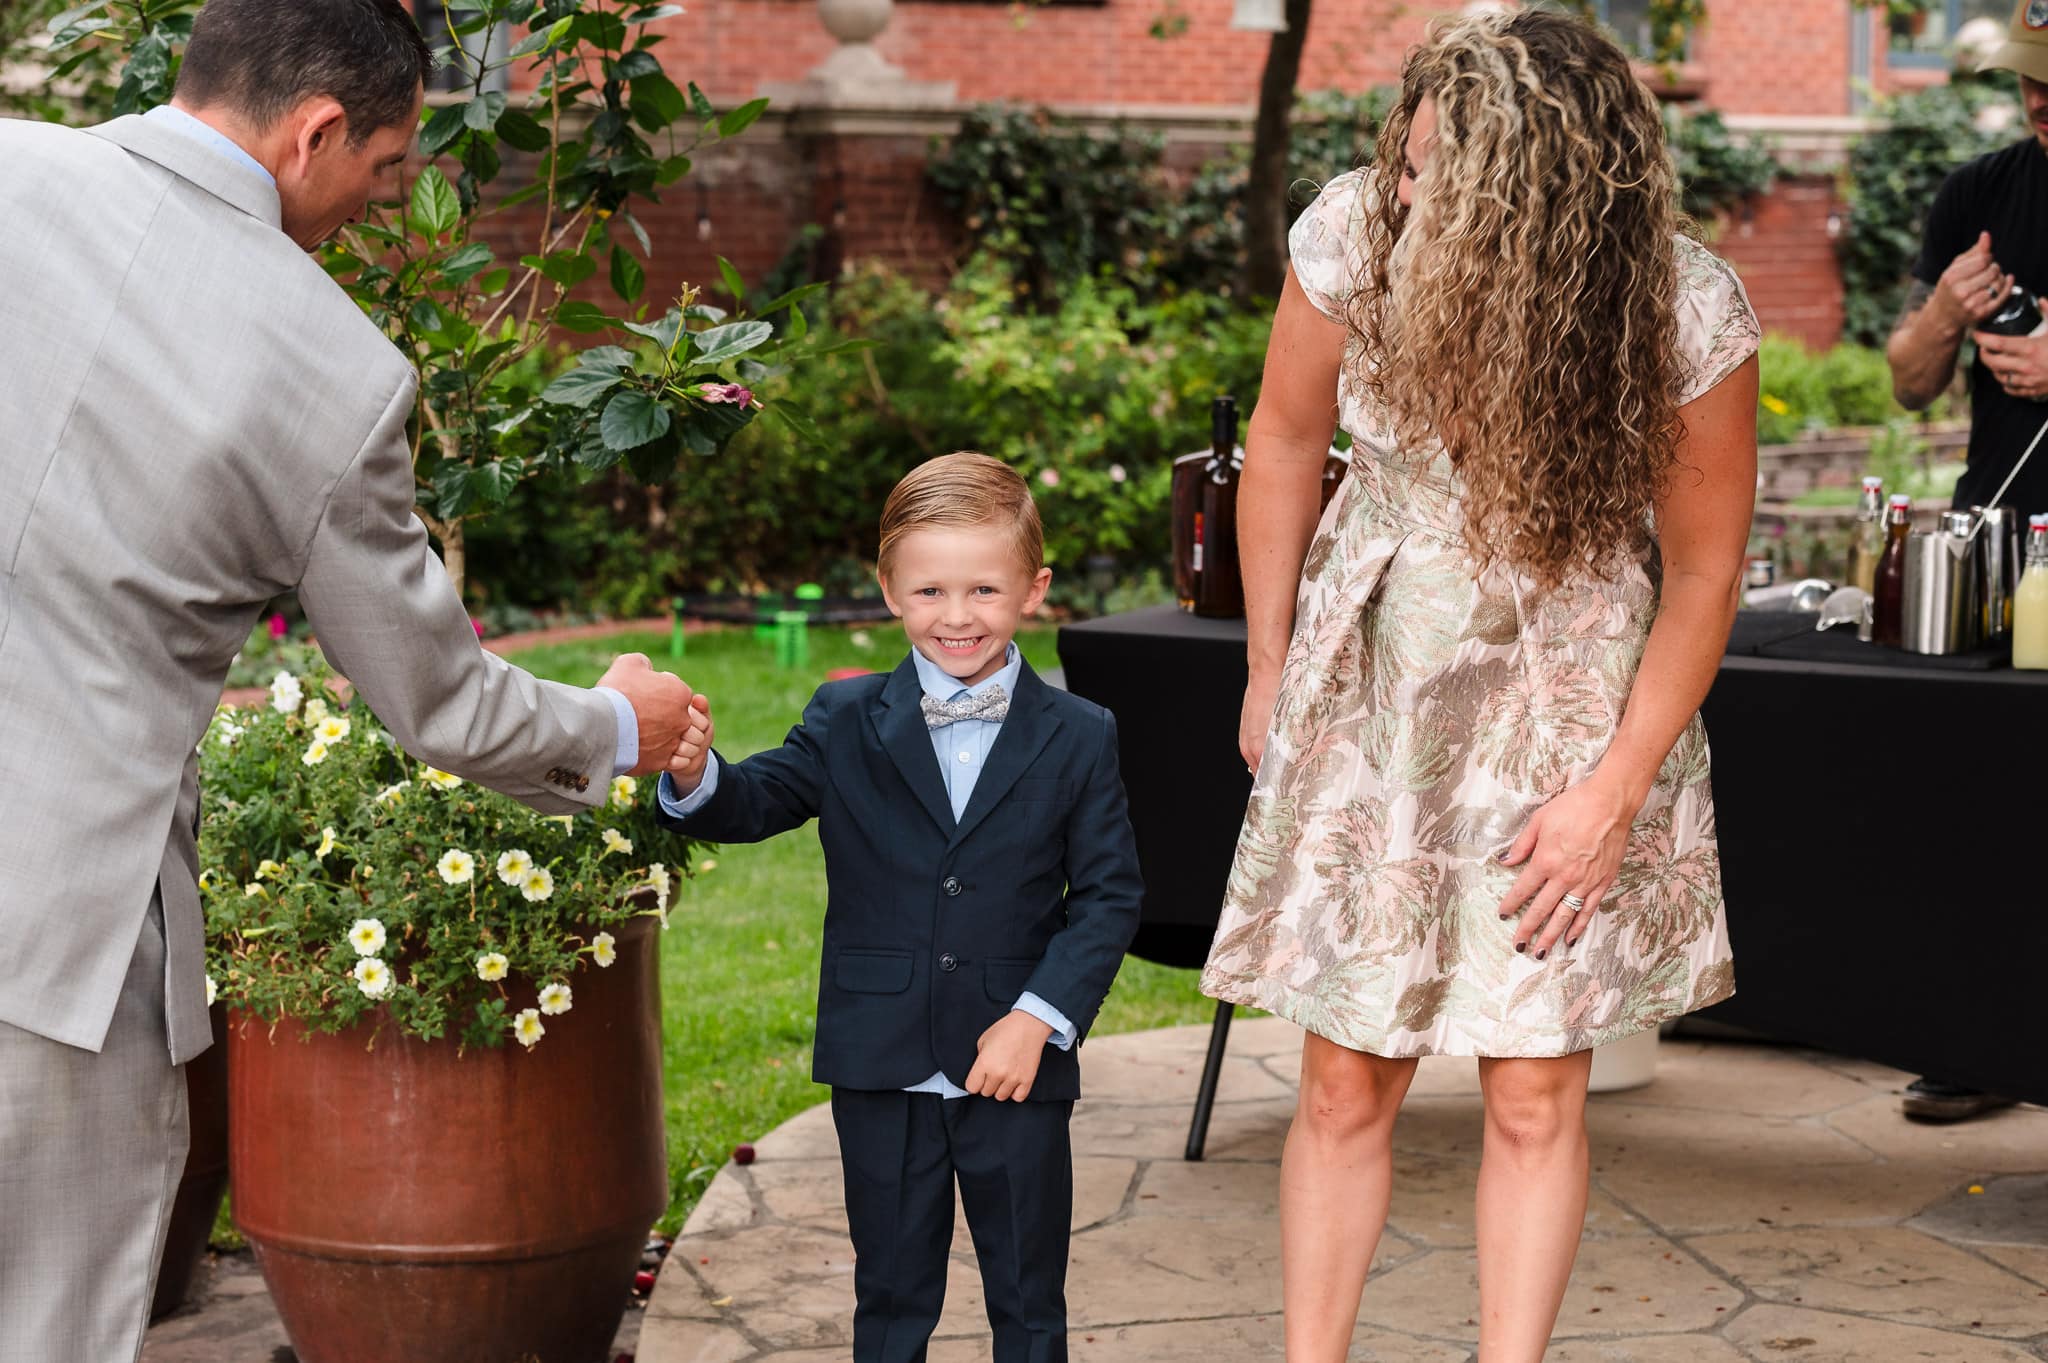 A young boy ready to stand up in a wedding gives a guest a fist bump.